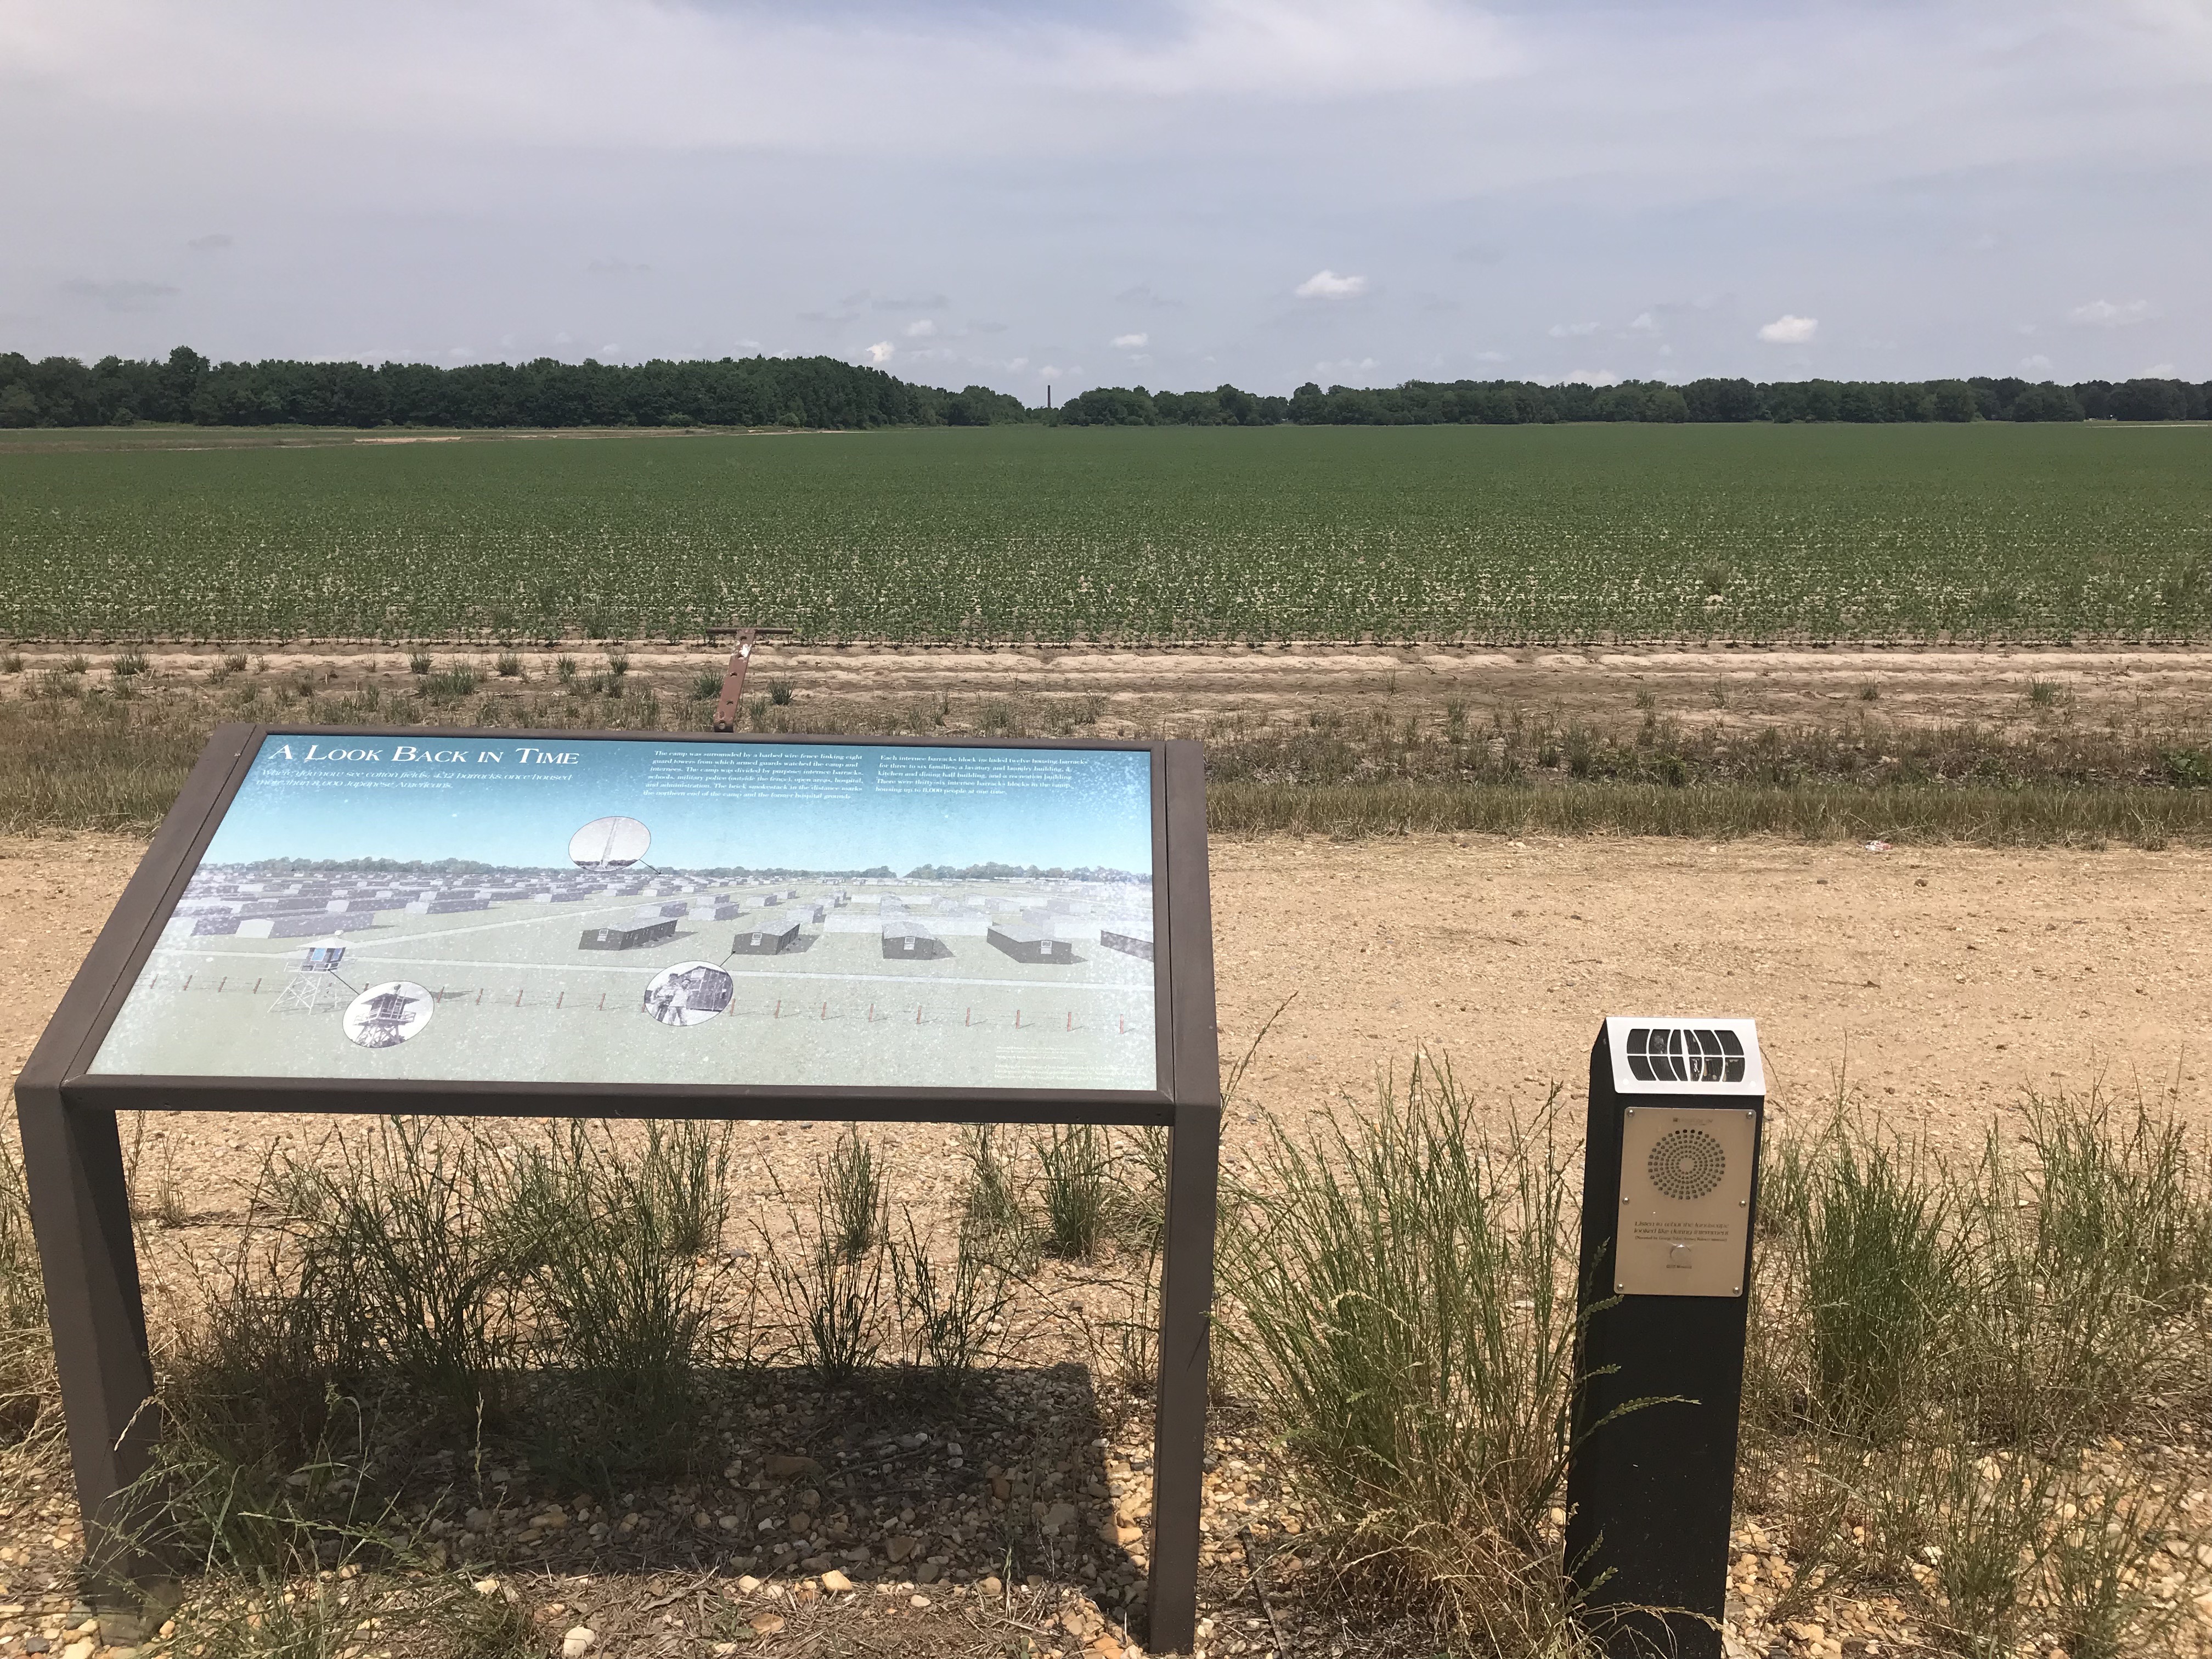 Informational panel and audio kiosk at Rohwer